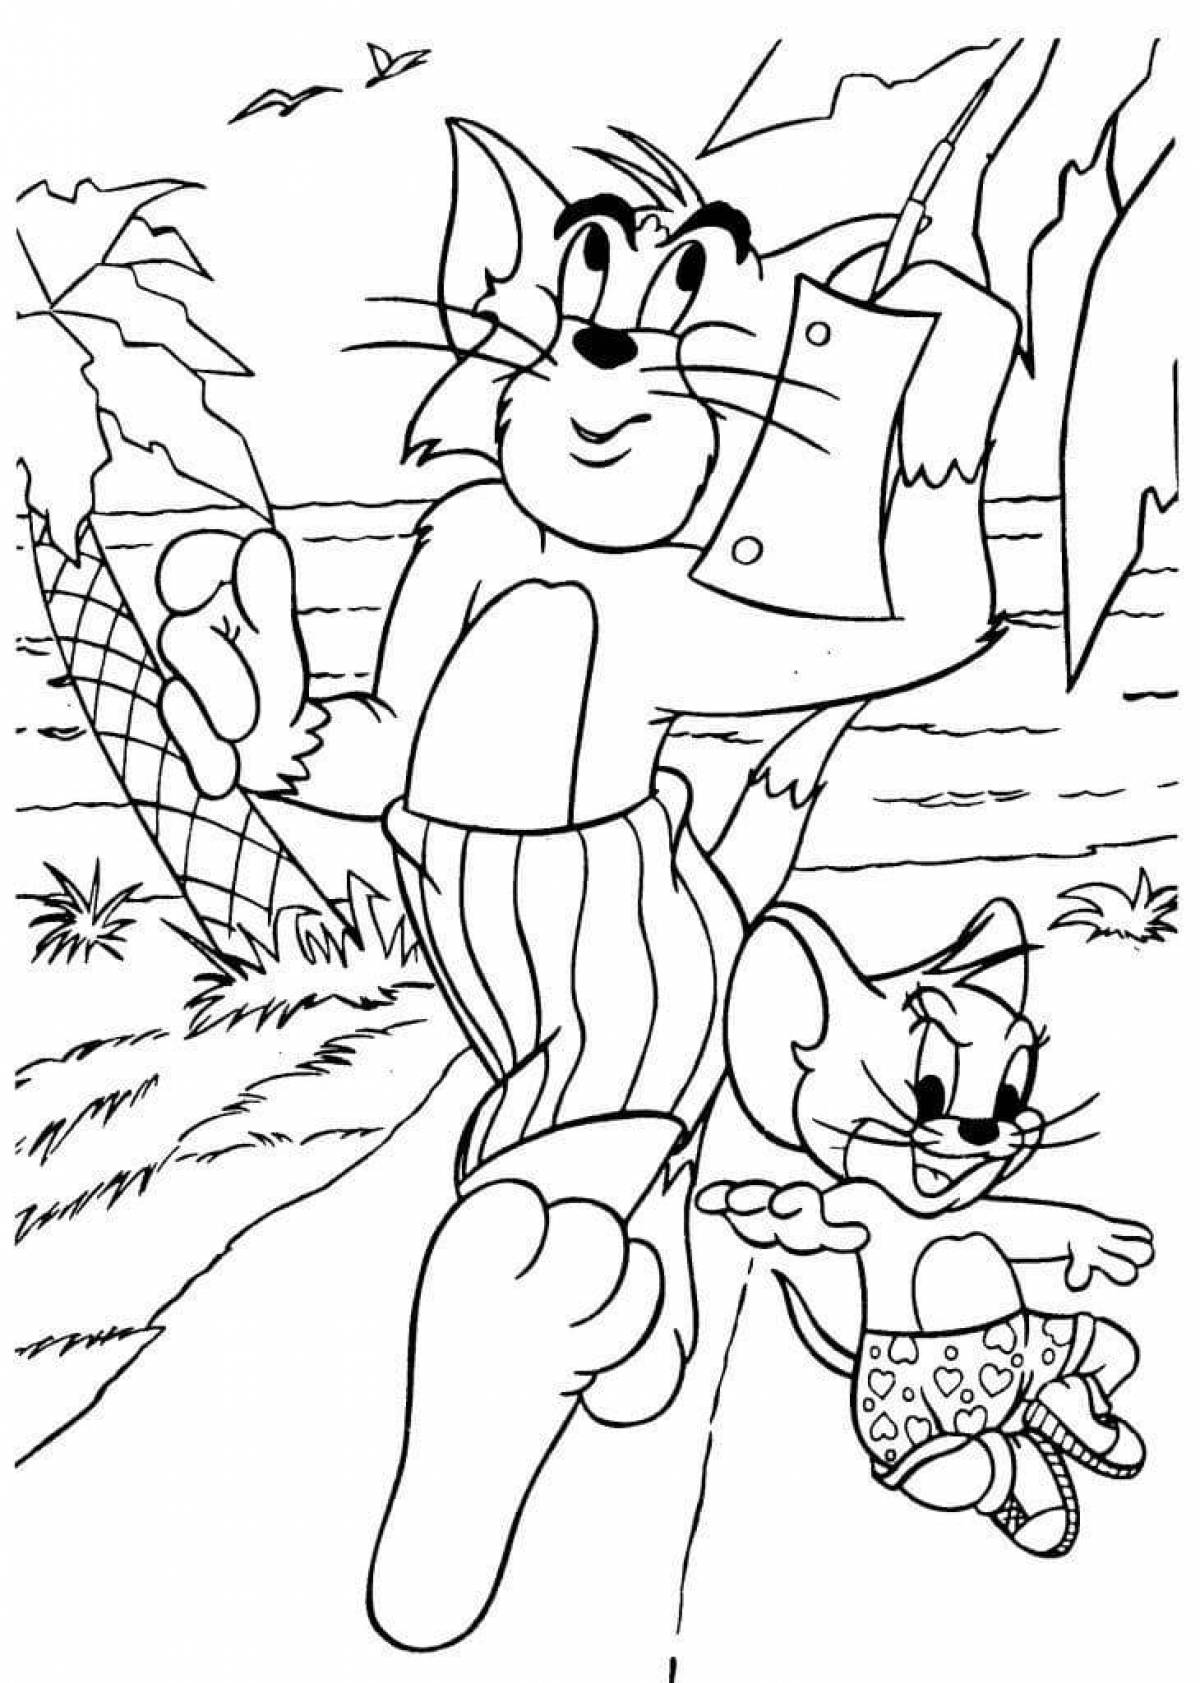 Wonderful tom and jerry coloring pages for kids